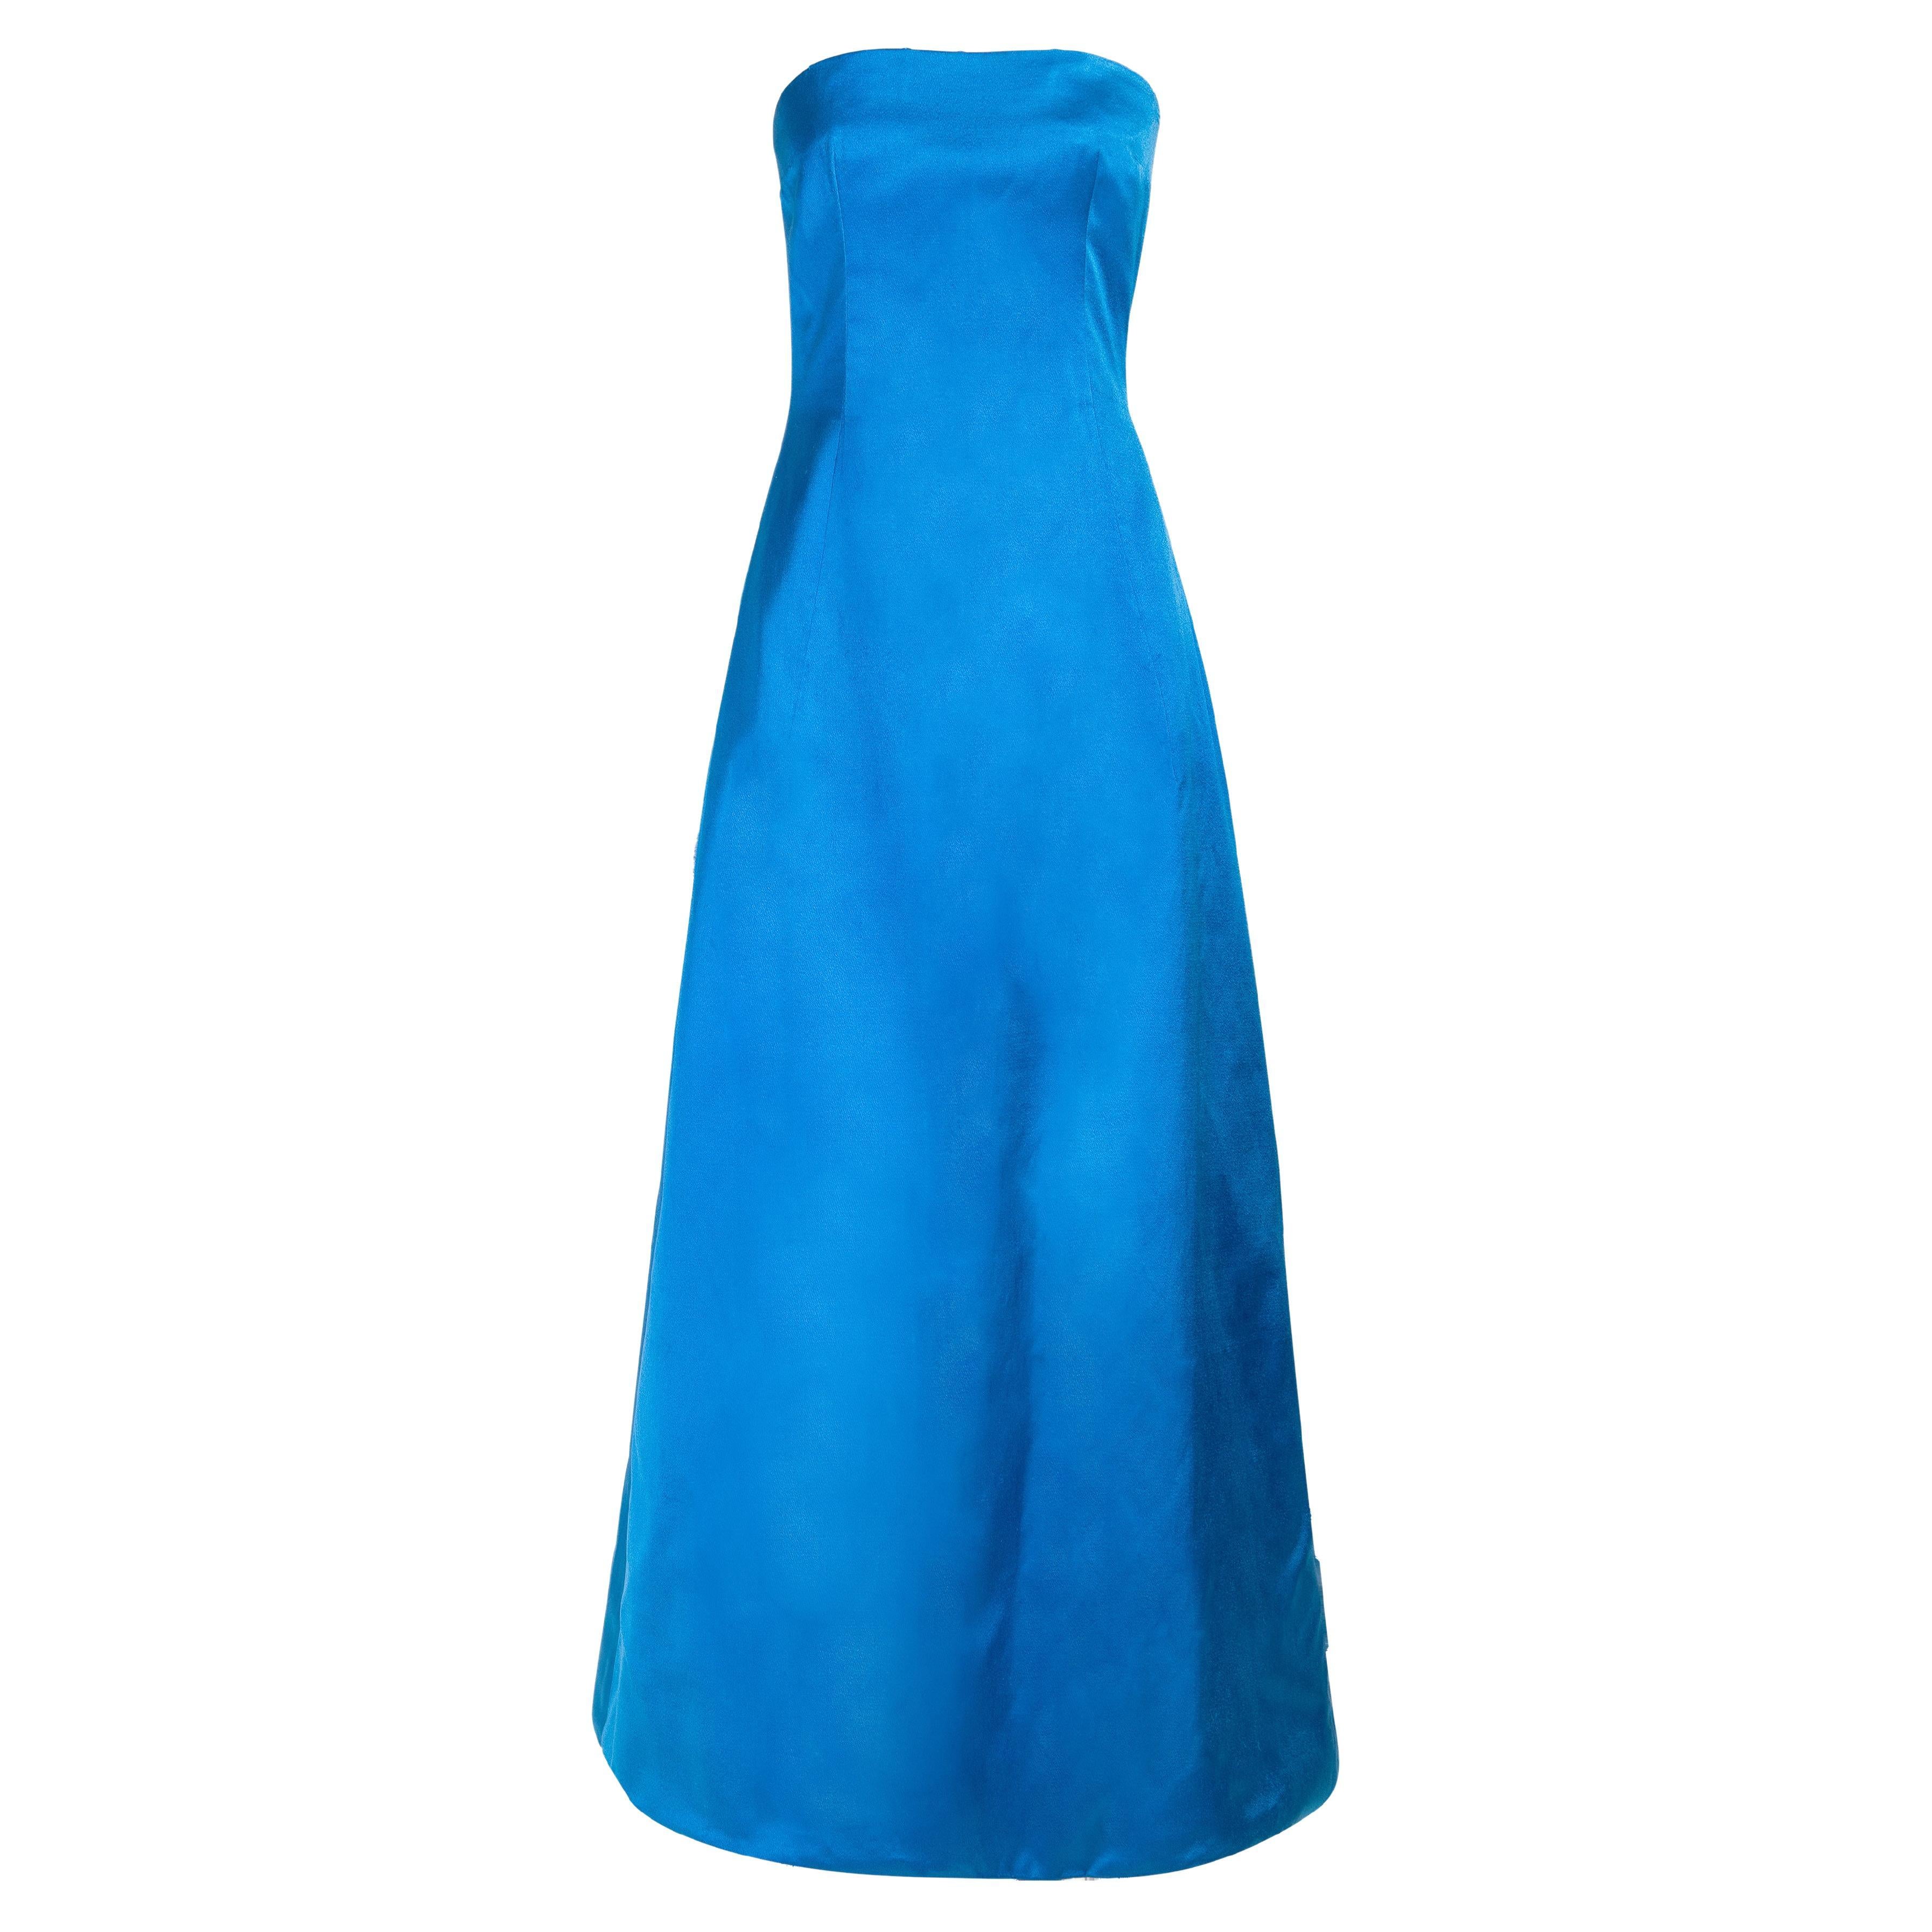 c. 1959 Jean Patou by Karl Lagerfeld Couture Strapless Blue Satin Evening Gown For Sale